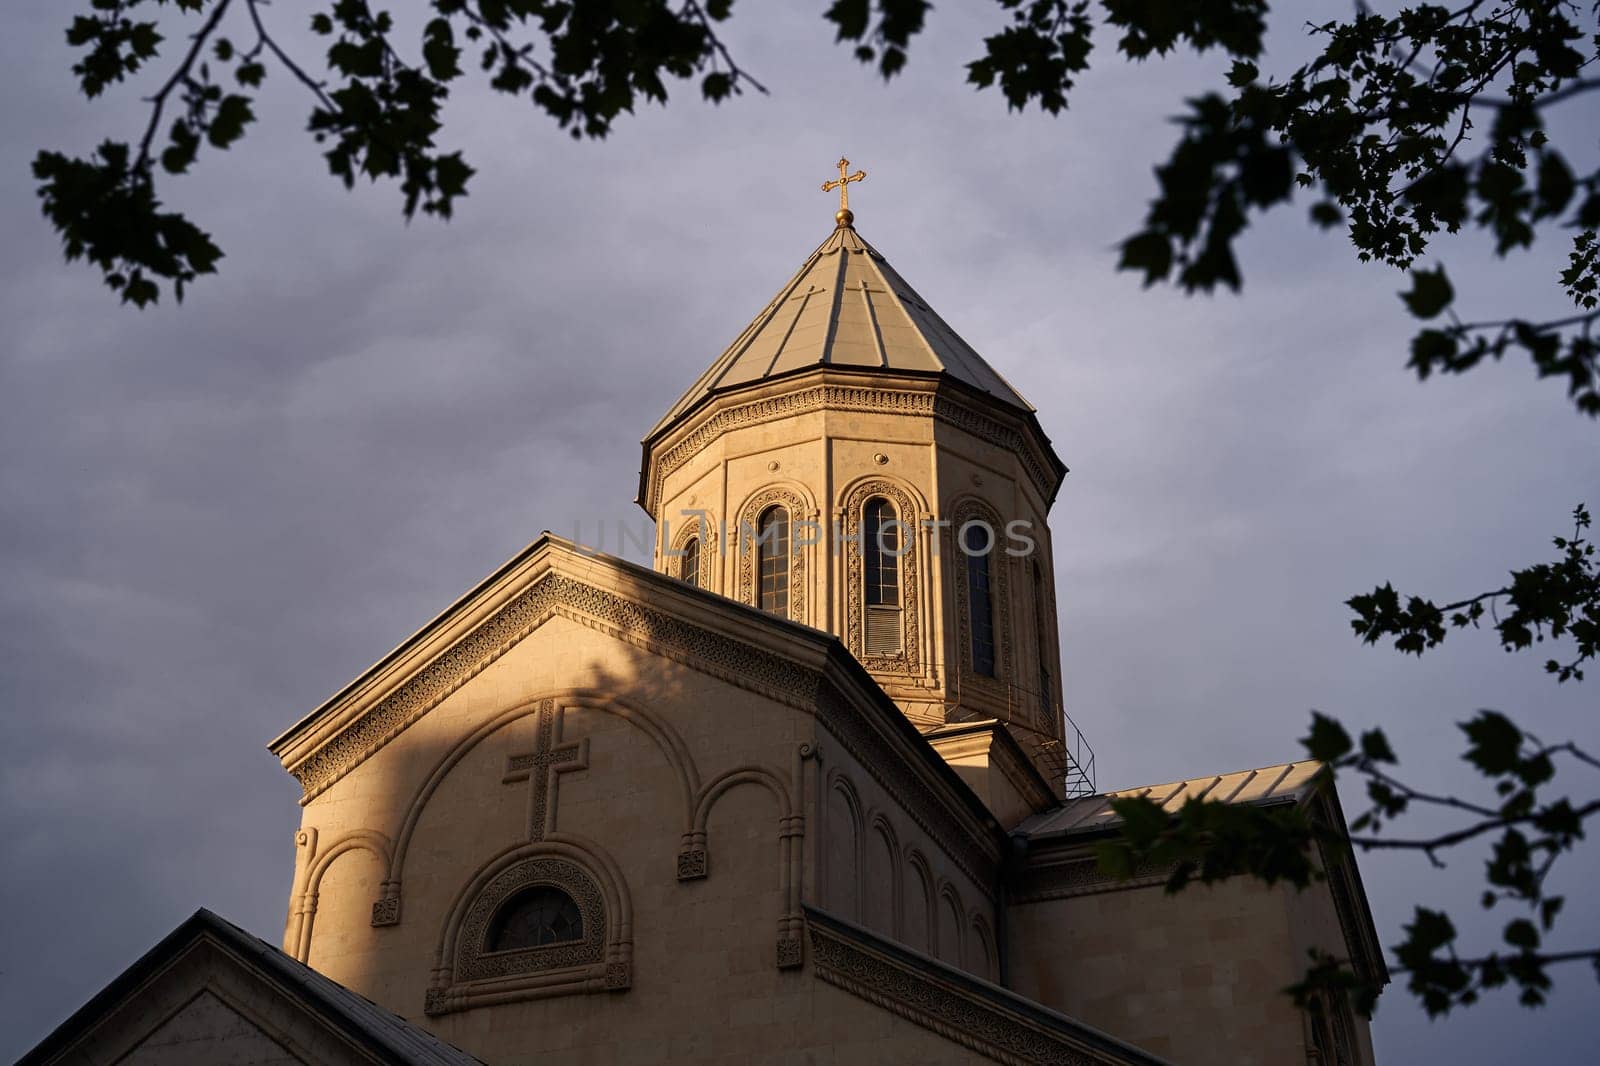 The Kashveti Church of St. George in central Tbilisi, located across from the Parliament building on Rustaveli Avenue. Dramatic light on dark clouds background. by berezko